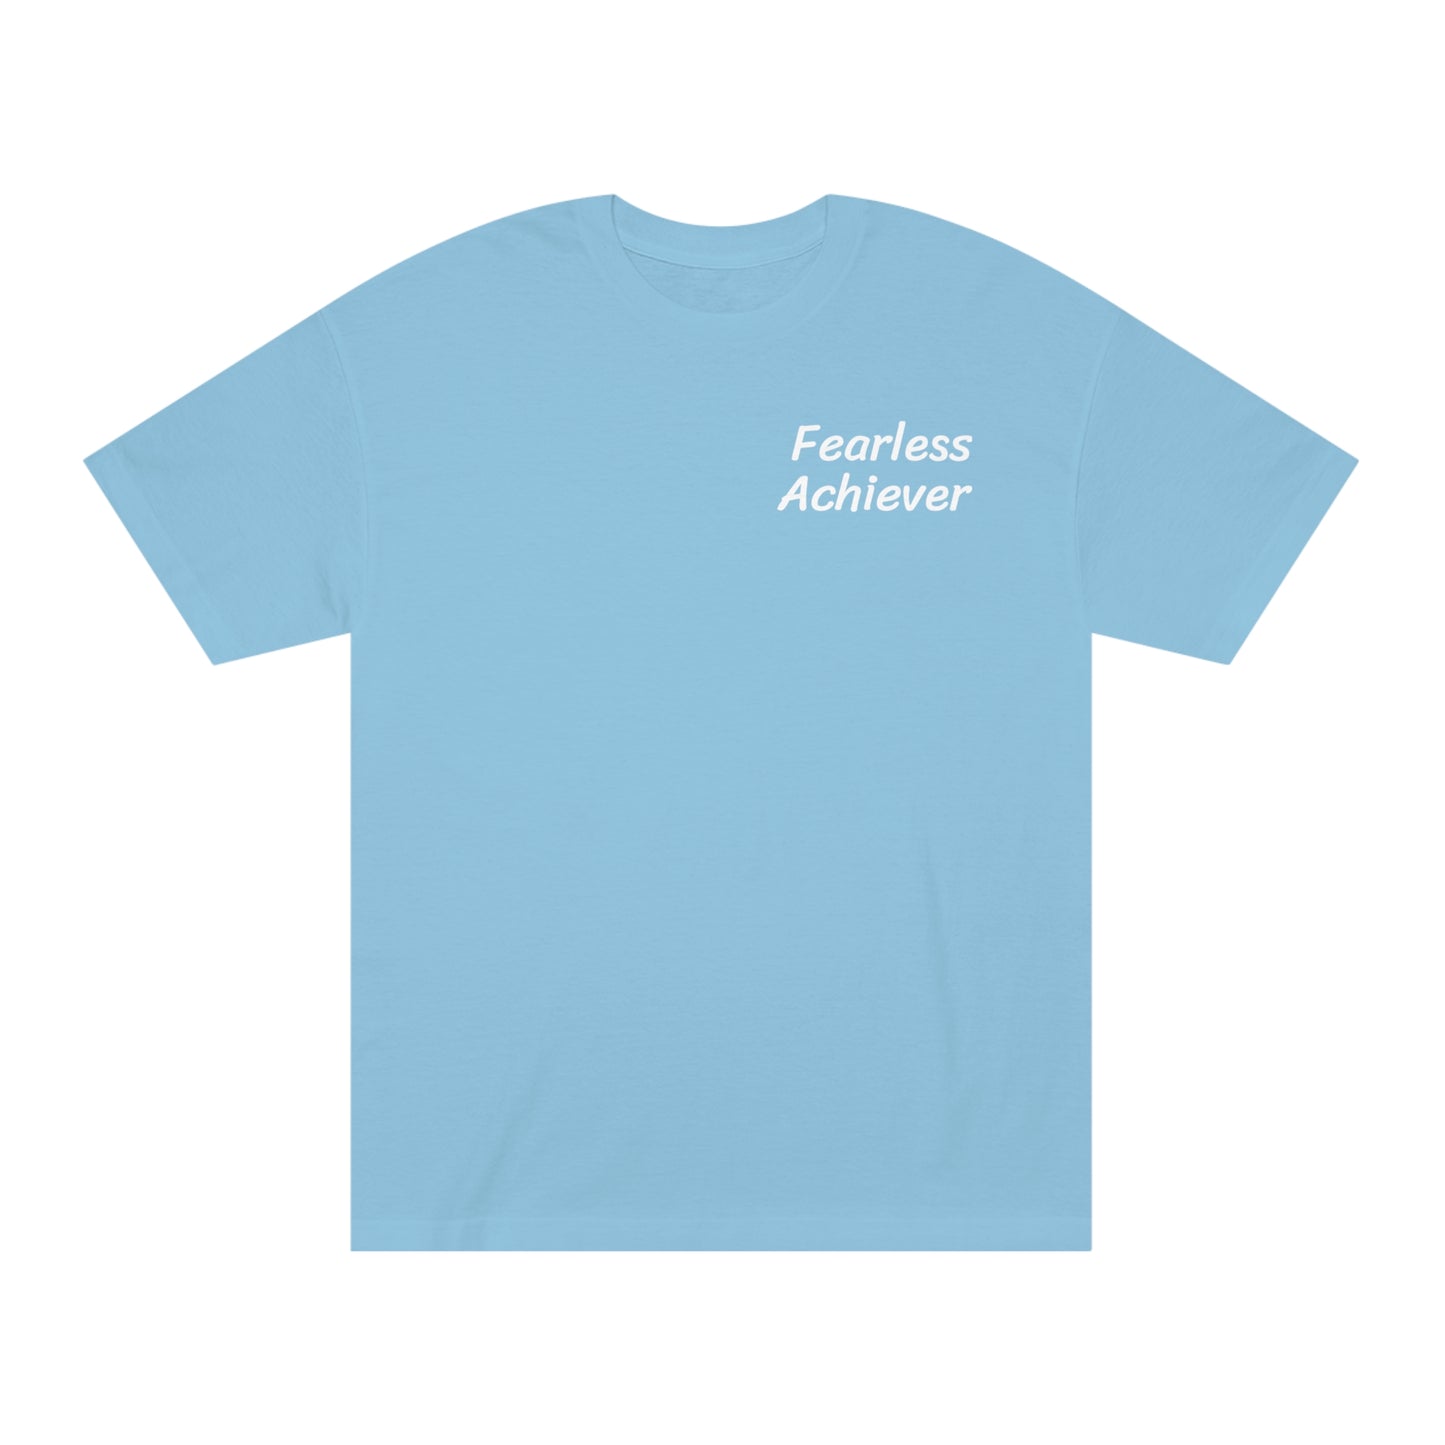 Classic Tee Fearless achiever